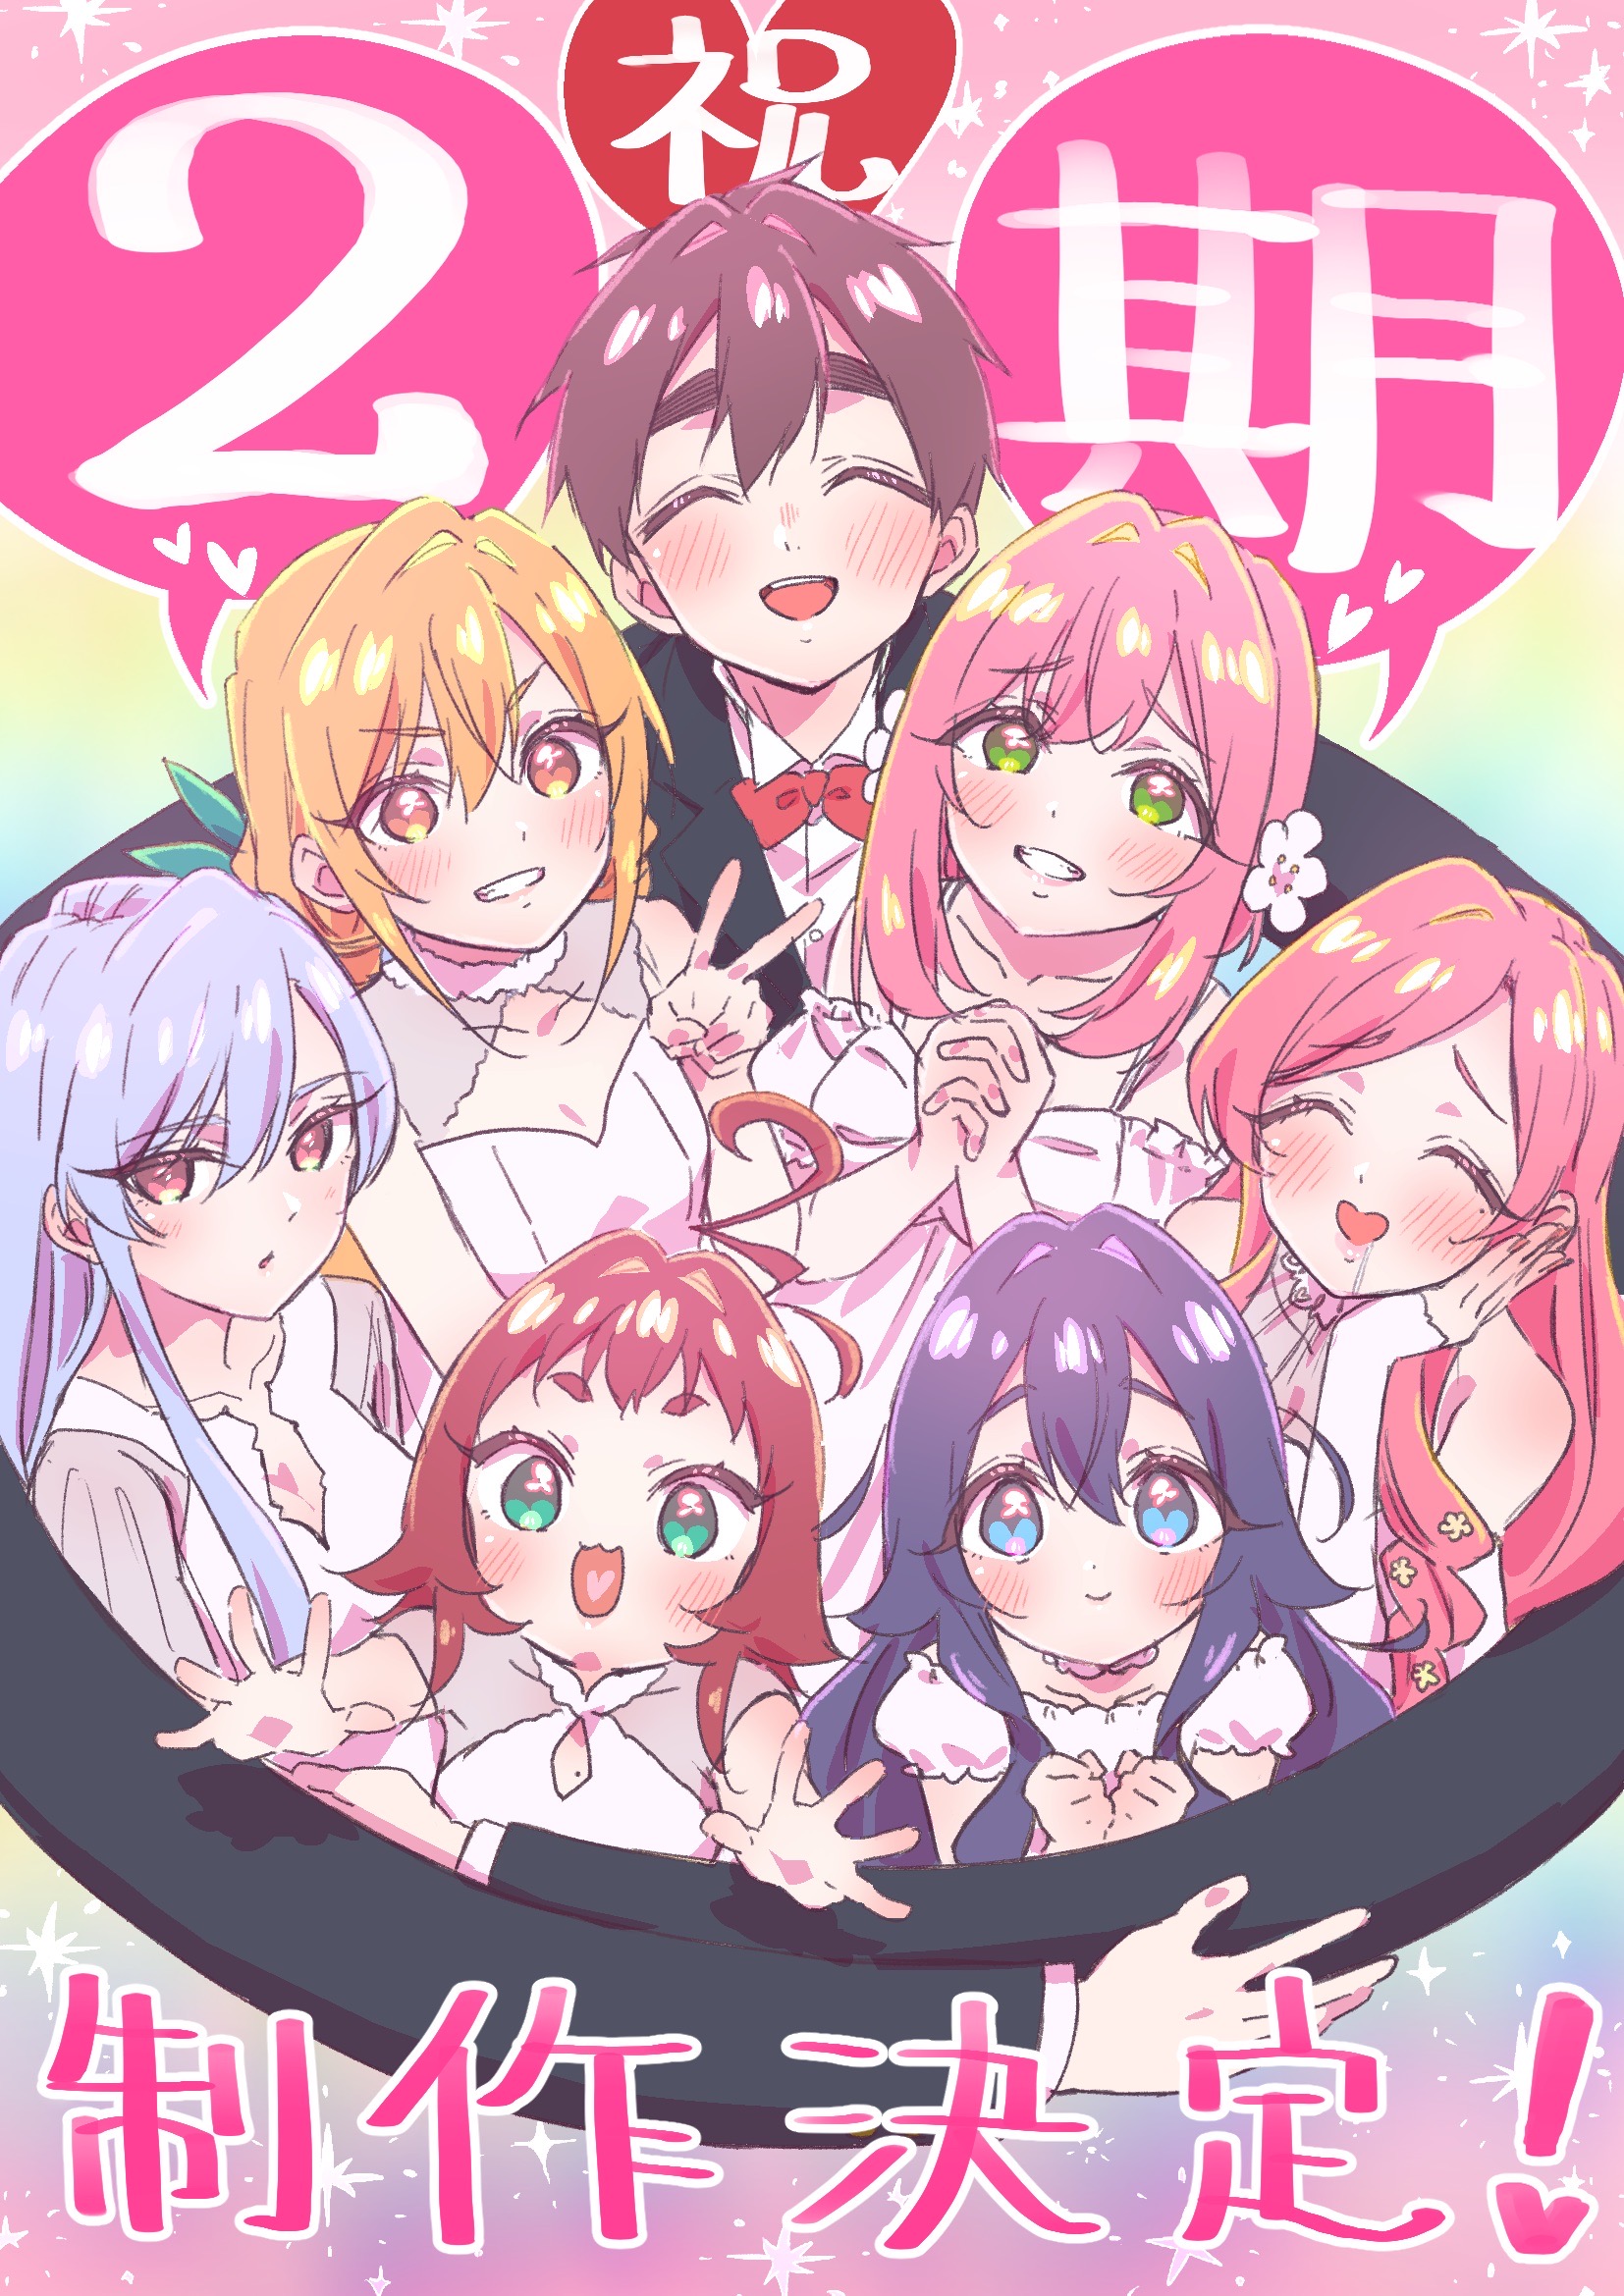 The 100 Girlfriends Who Really Love You - Season 2 Anime Announcement Visual